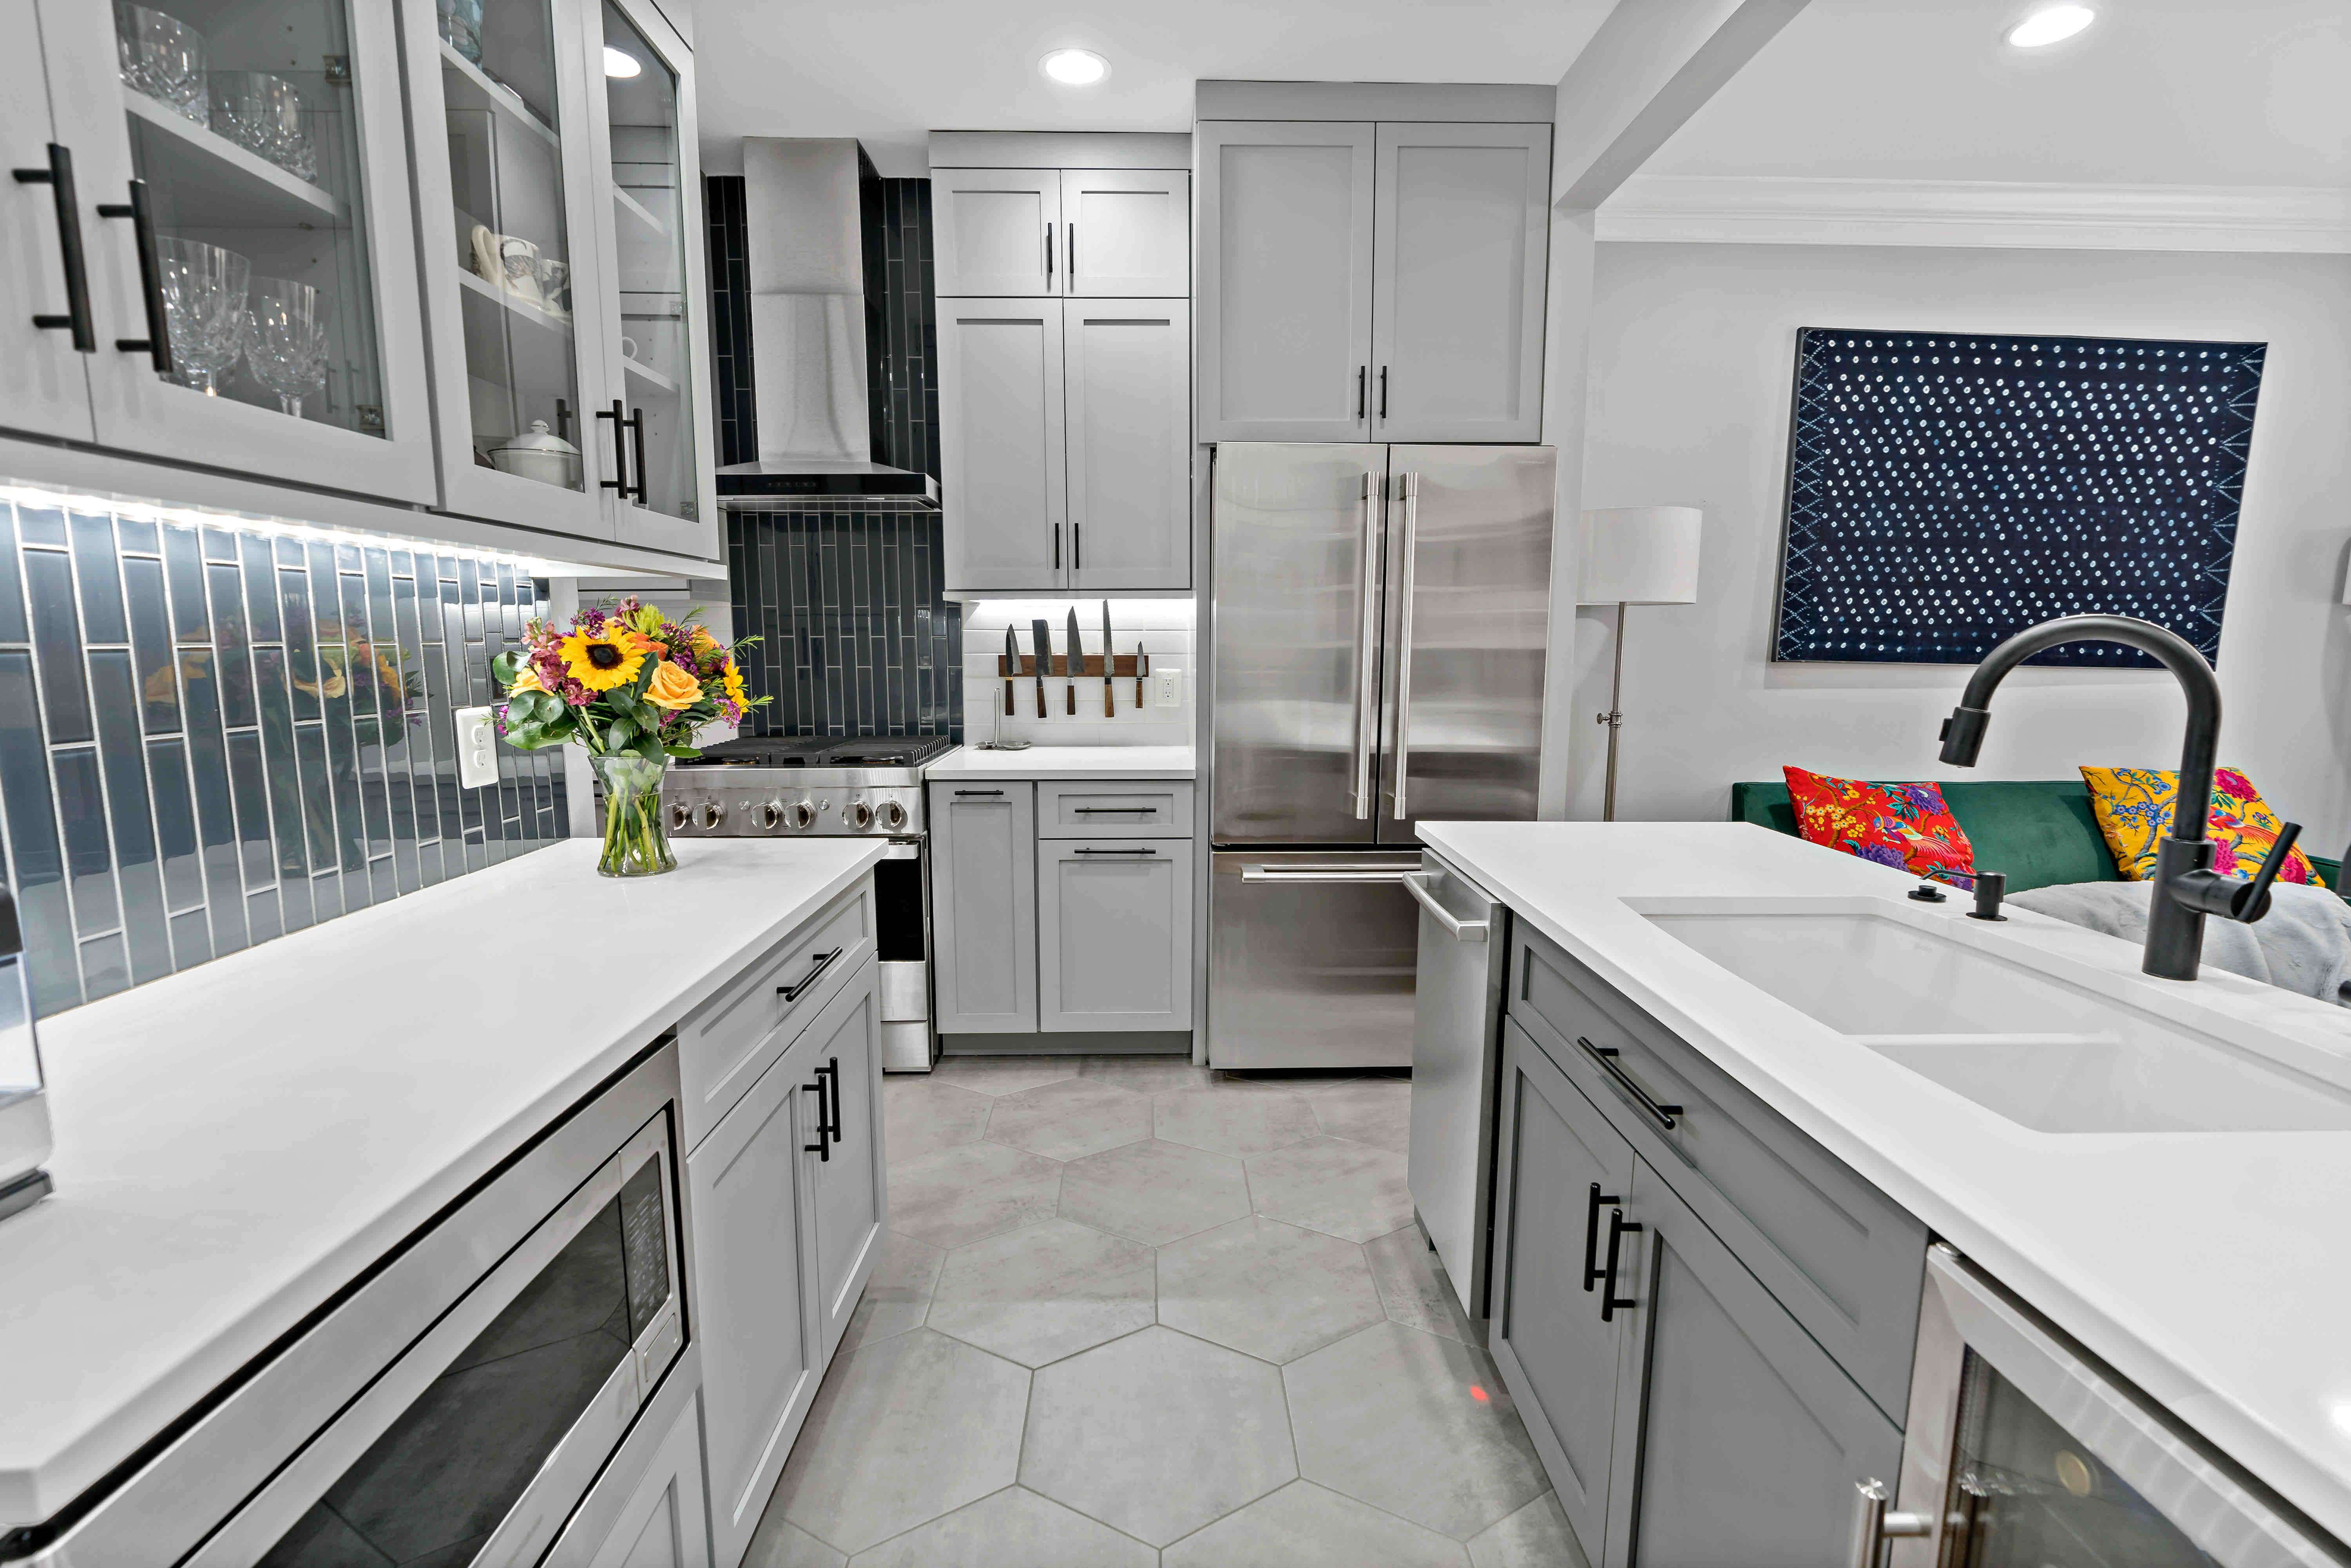 Small kitchen with white countertops and grey cabinetry